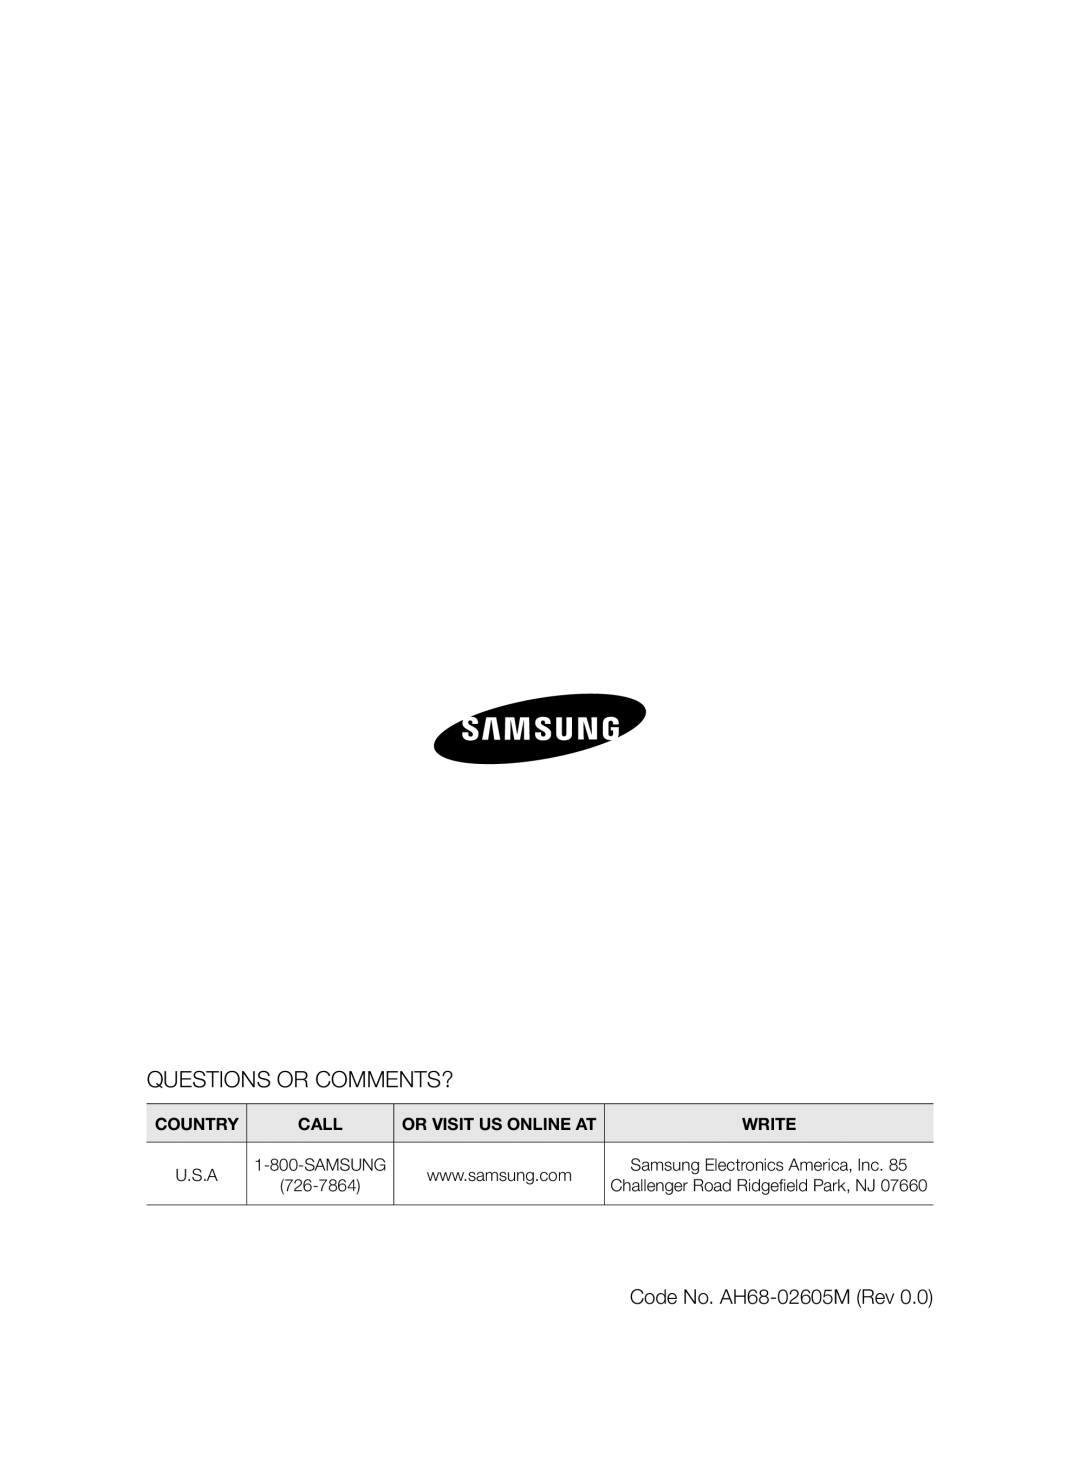 Samsung MXF830BZA user manual Code No. AH68-02605M Rev, Questions Or Comments?, Country, Call, Or Visit Us Online At, Write 